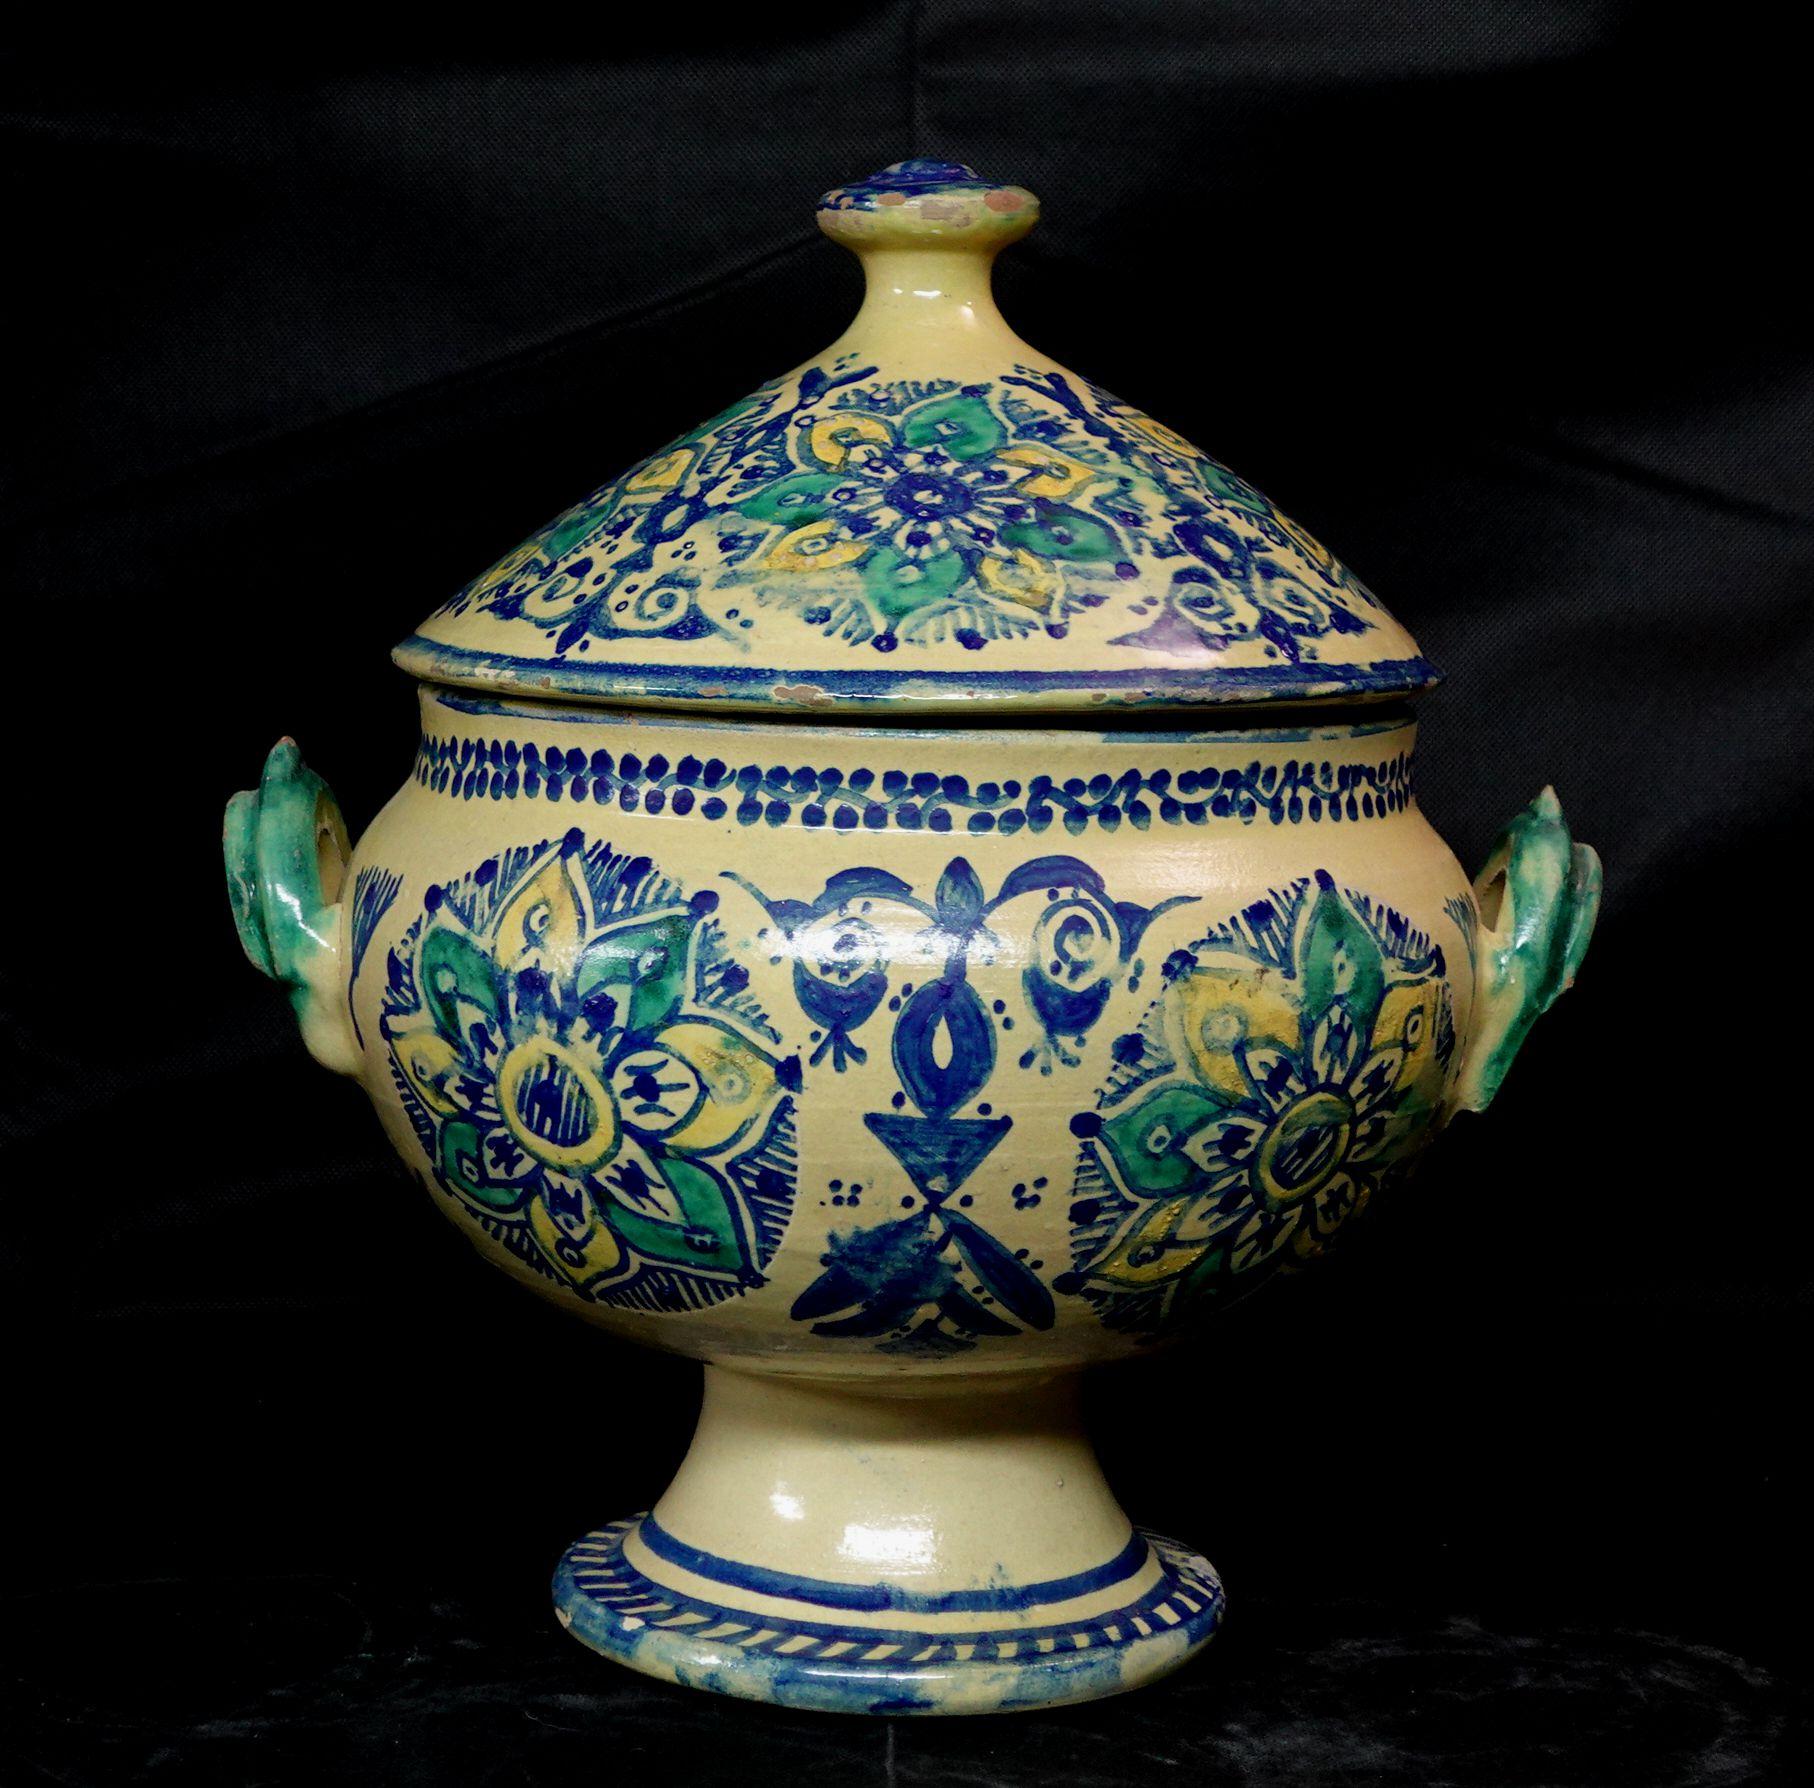 Stoneware-covered bowl. Morocco. Early 20th century. Decoration in blue, green, and yellow. Measure: 13in high.